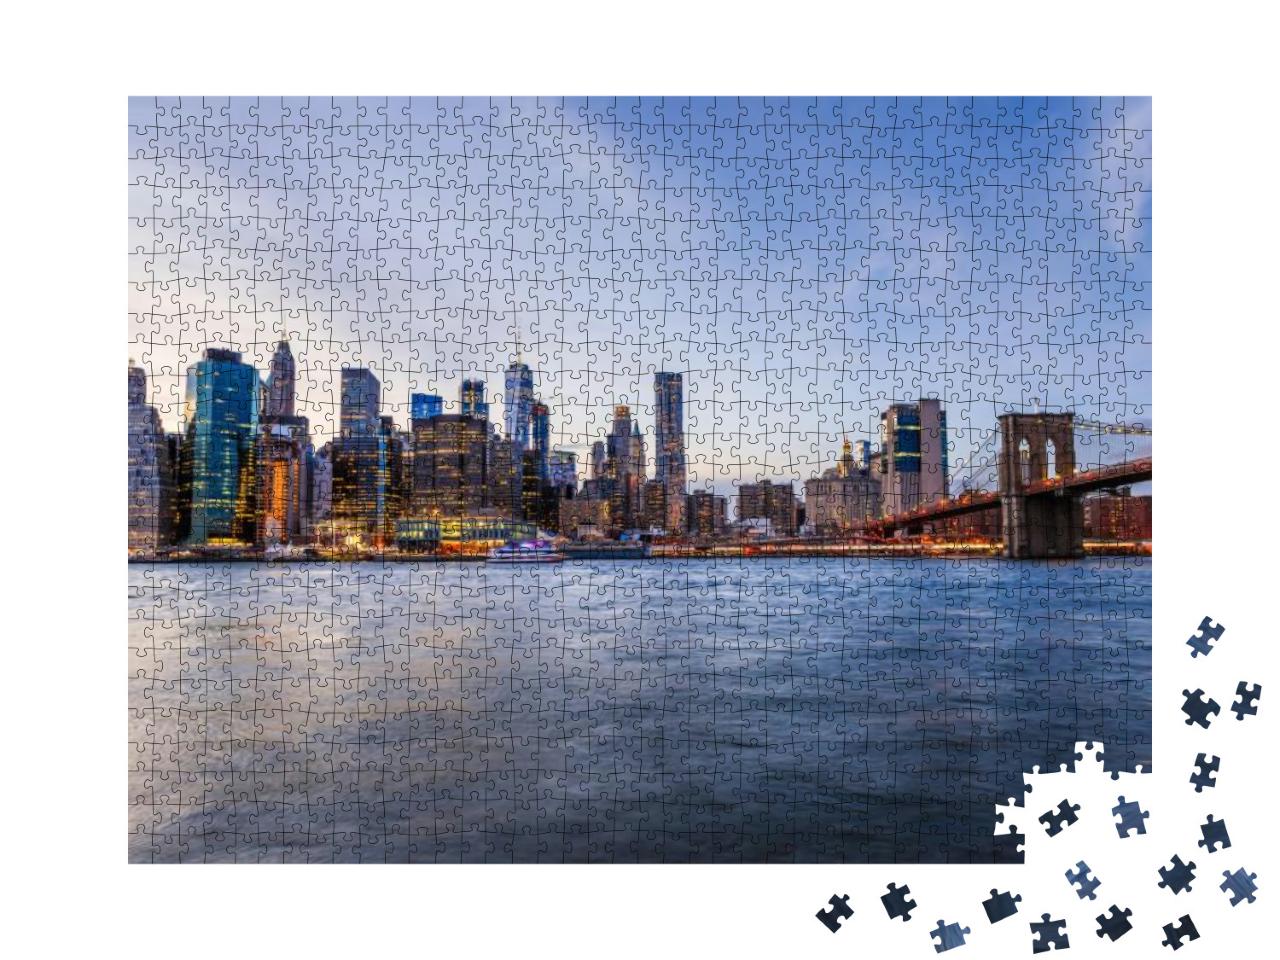 Outdoors View on Nyc New York City Brooklyn Bridge Park b... Jigsaw Puzzle with 1000 pieces